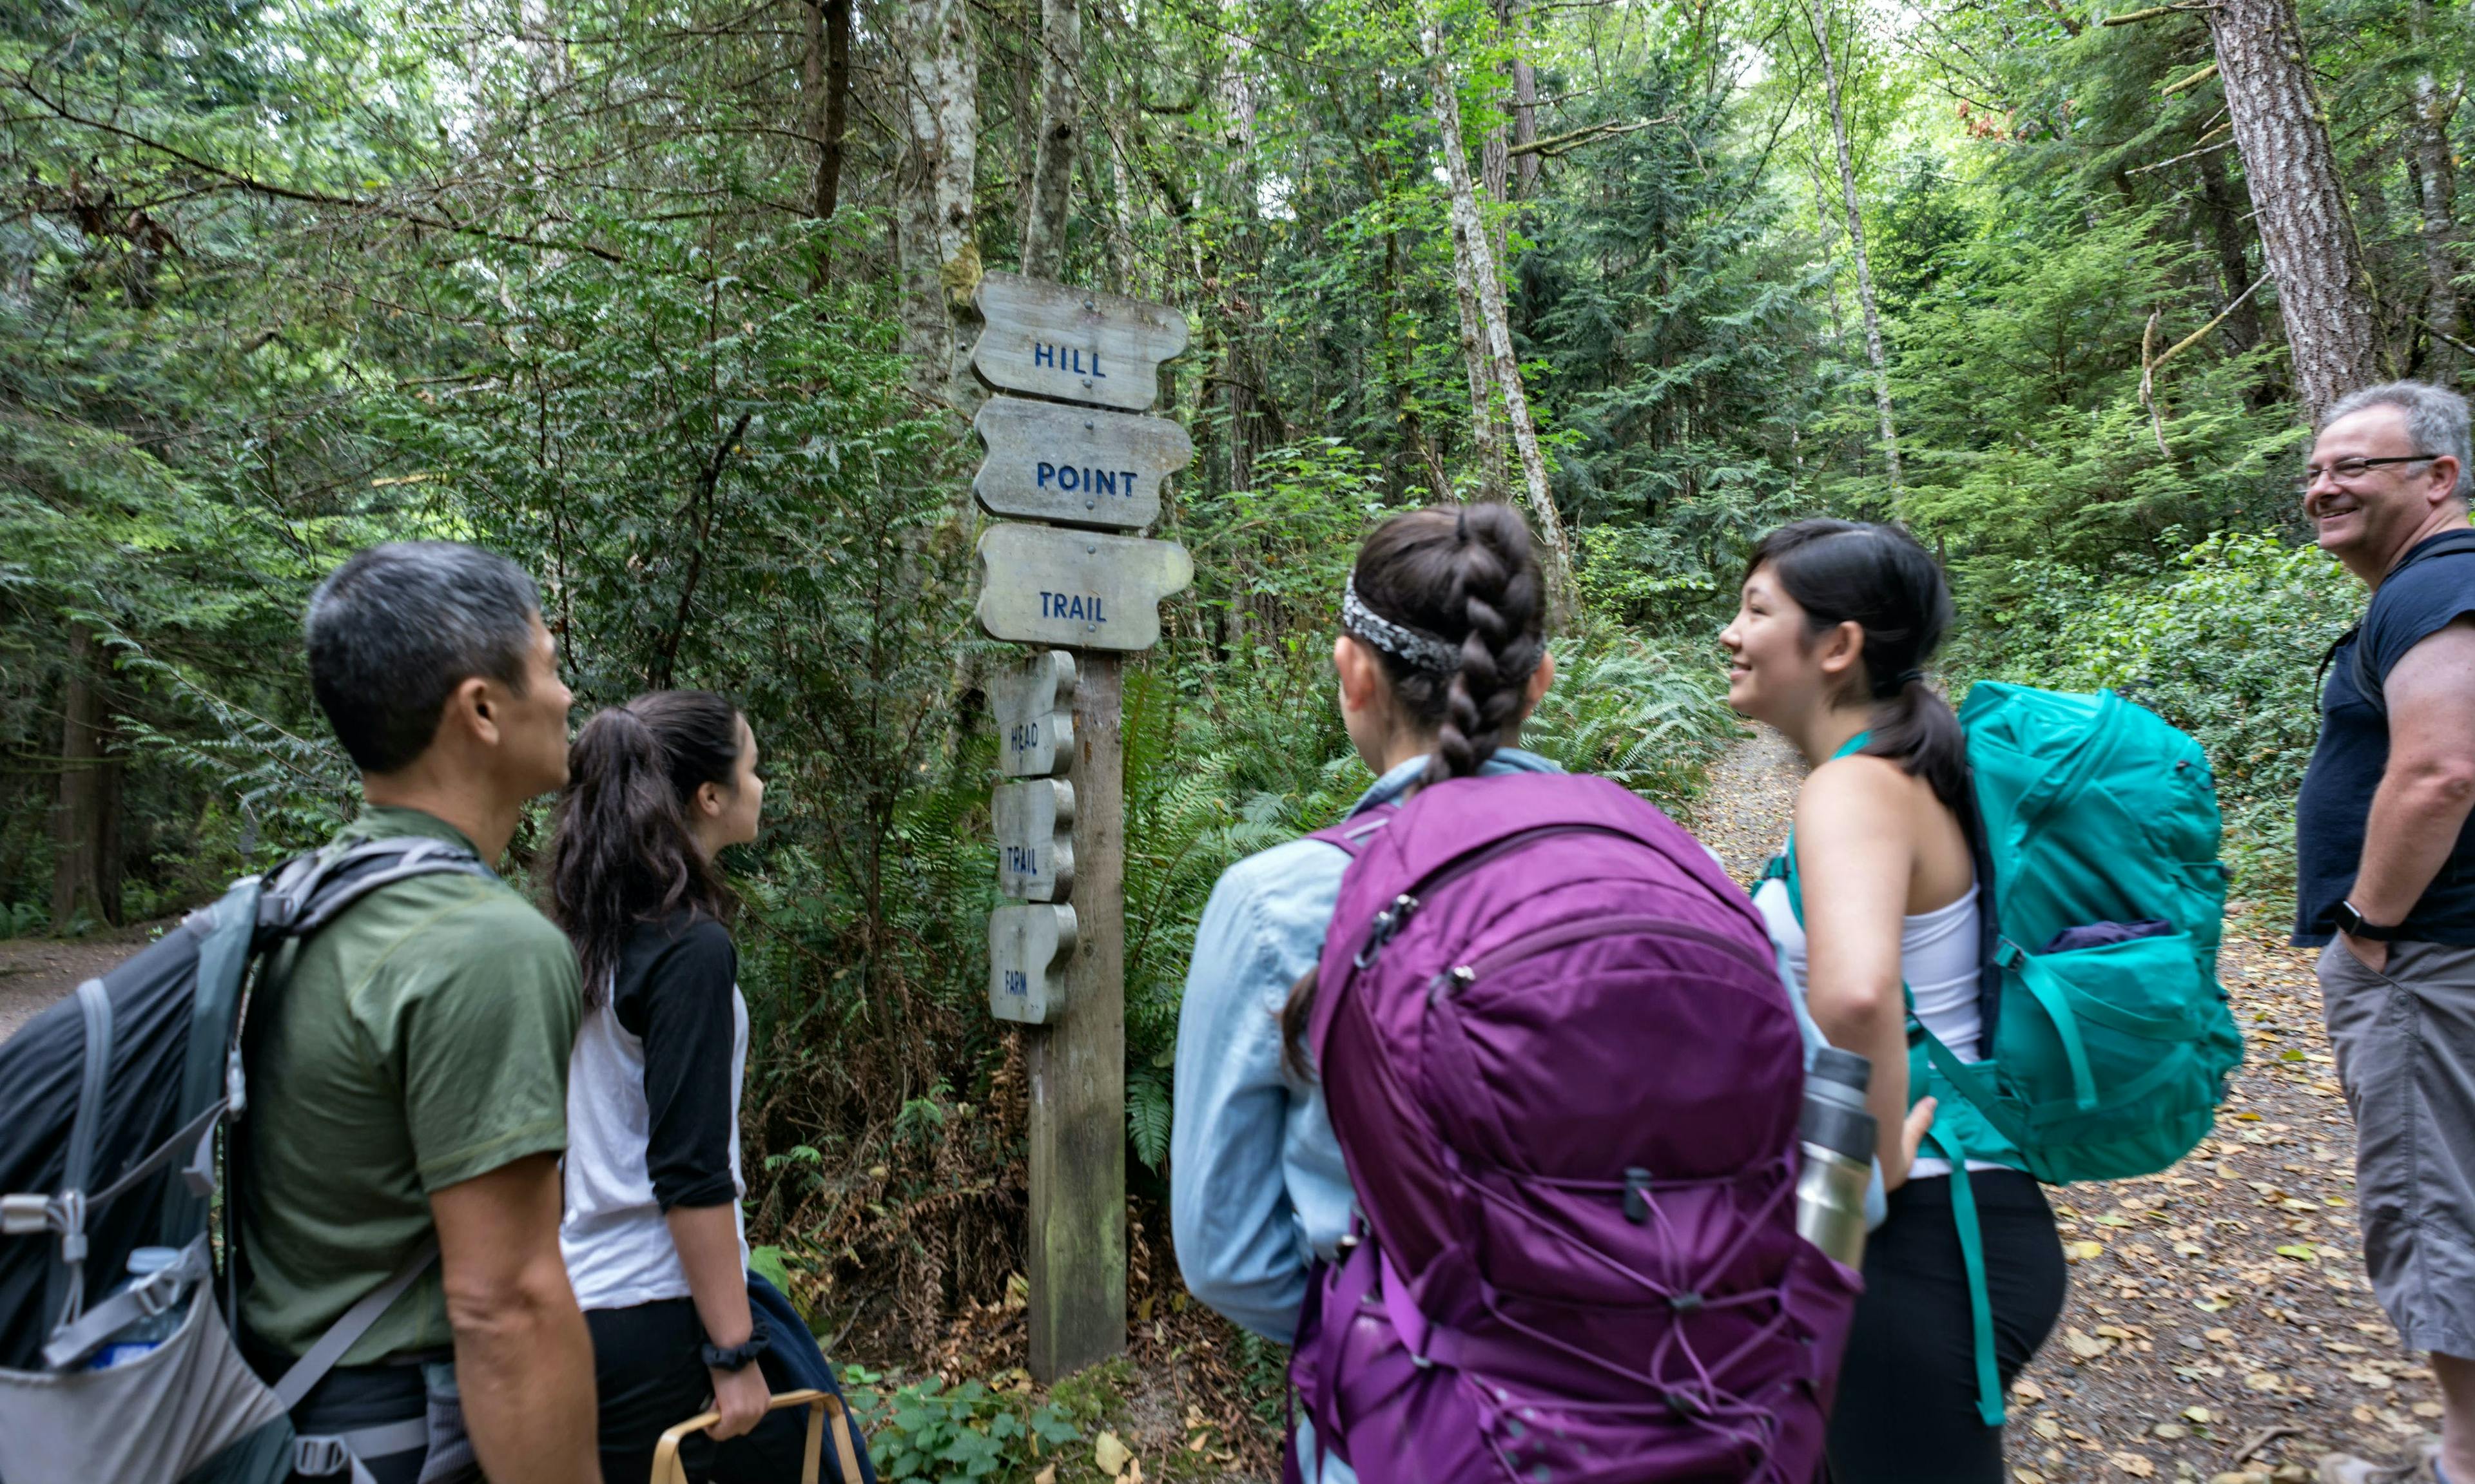 Group of hikers looking at a trail sign